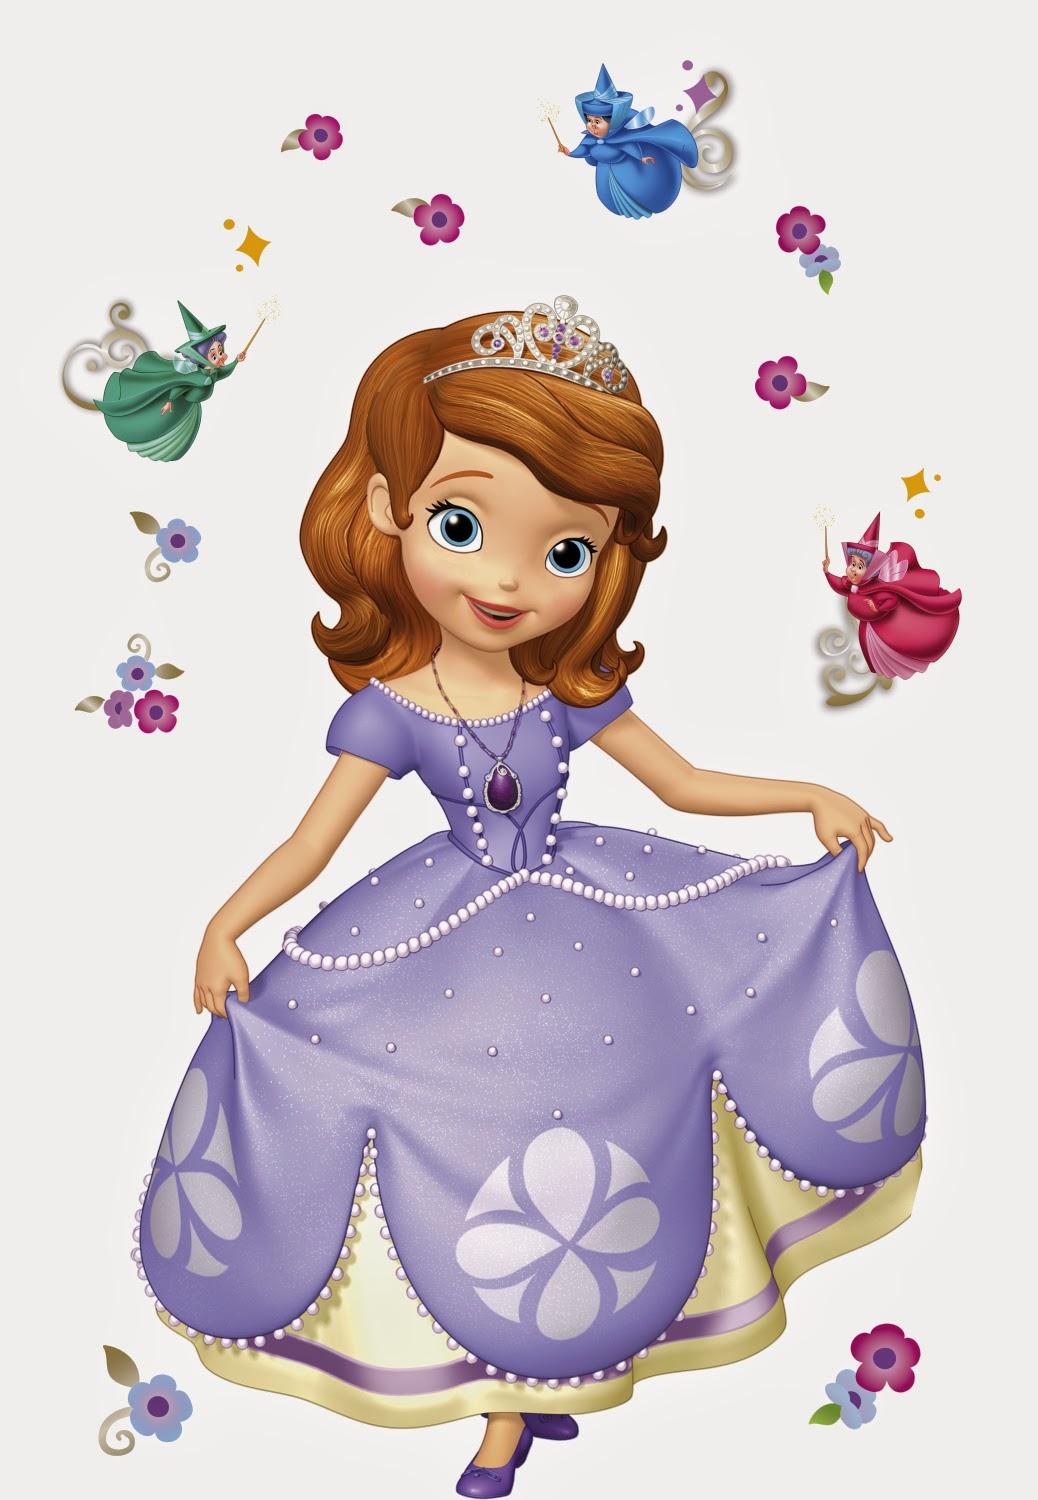 Download Join In Princess Sofia's Magical Adventures Wallpaper | Wallpapers .com